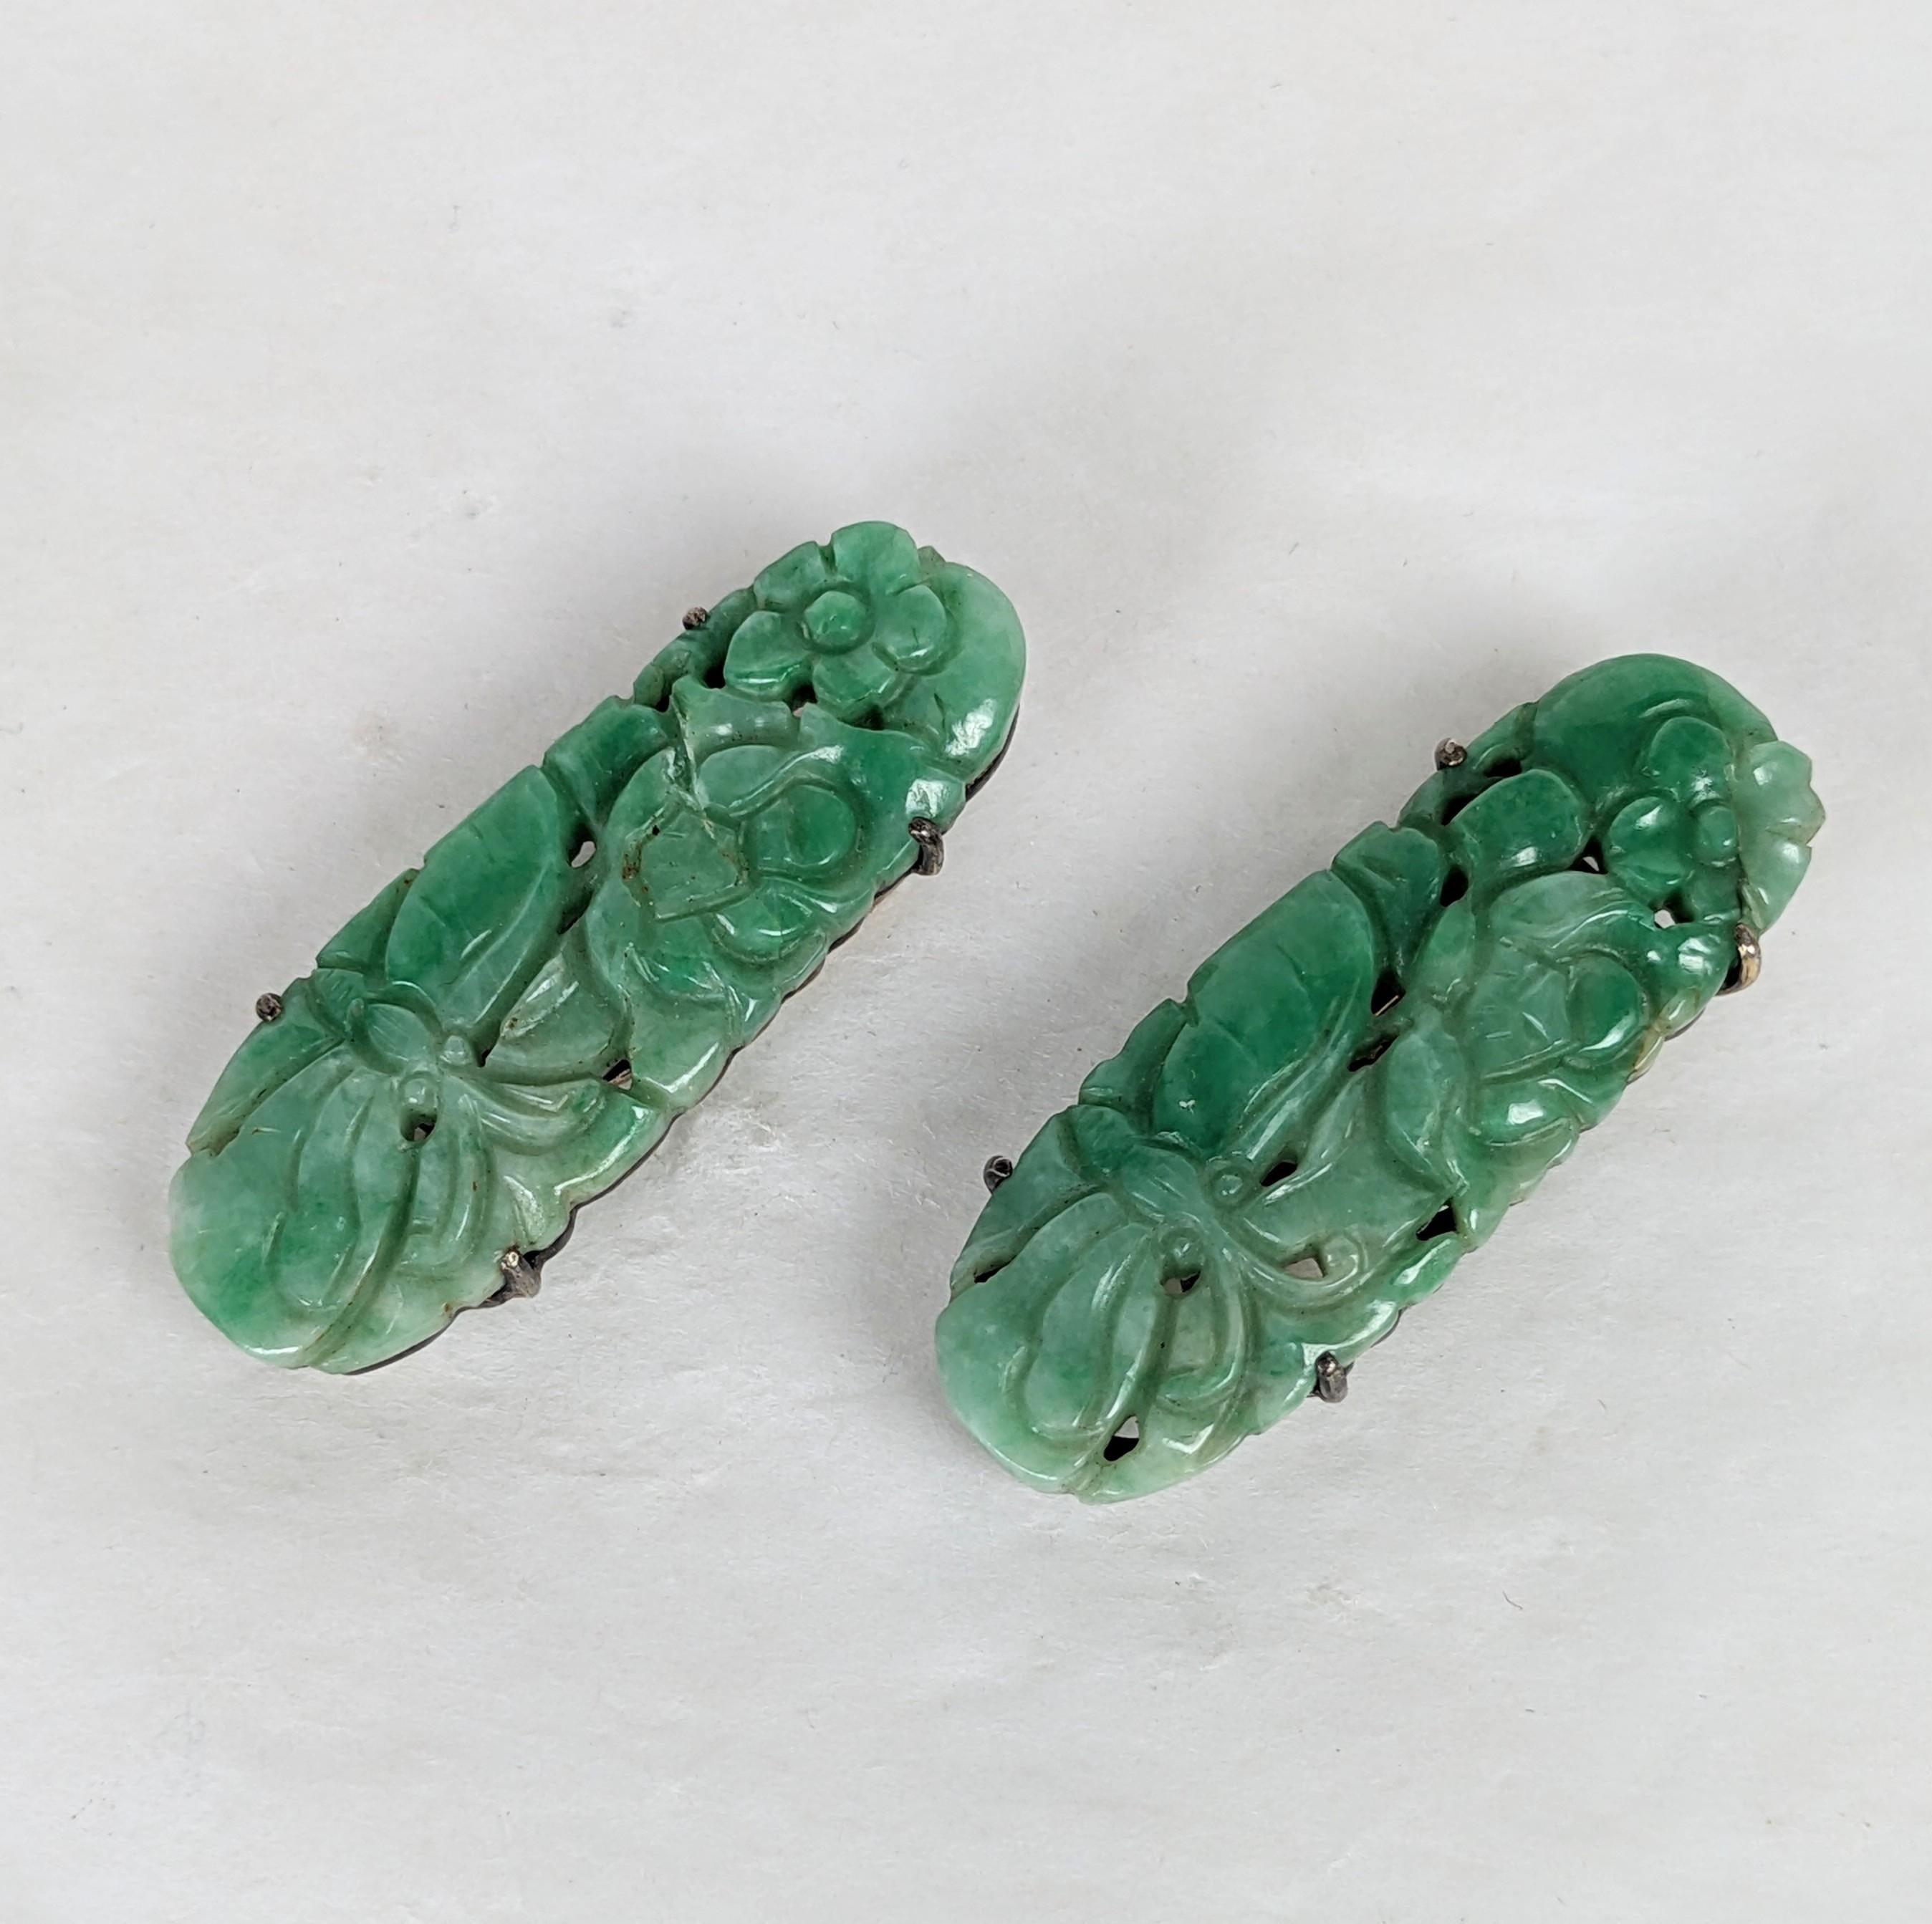 Pair of Art Deco Hand Carved Jade Dress Clips/Earrings from the 1920's. Delicately hand carved with butterflies within flowers. Each is set in sterling silver. Can be used on a neckline, as a pendant or as elegant earrings with foam pads. Each 1.5